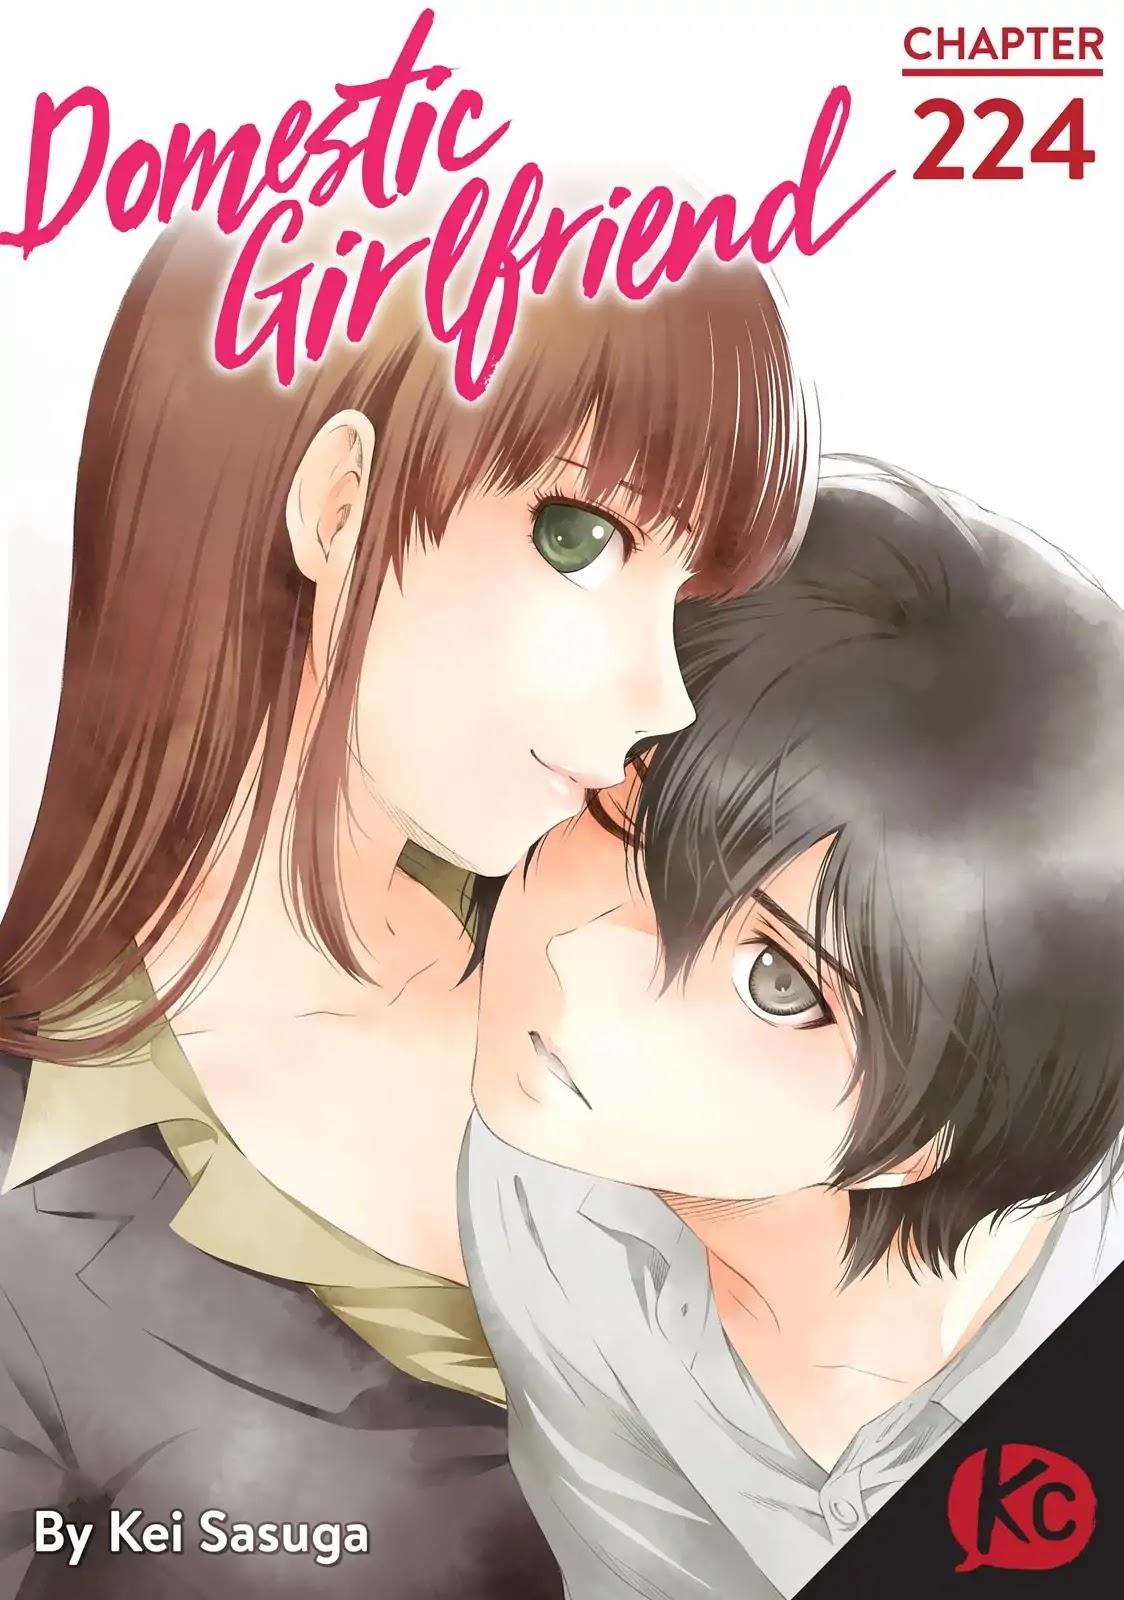 Chapter 224: Not Just Sympathy • Domestic Girlfriend